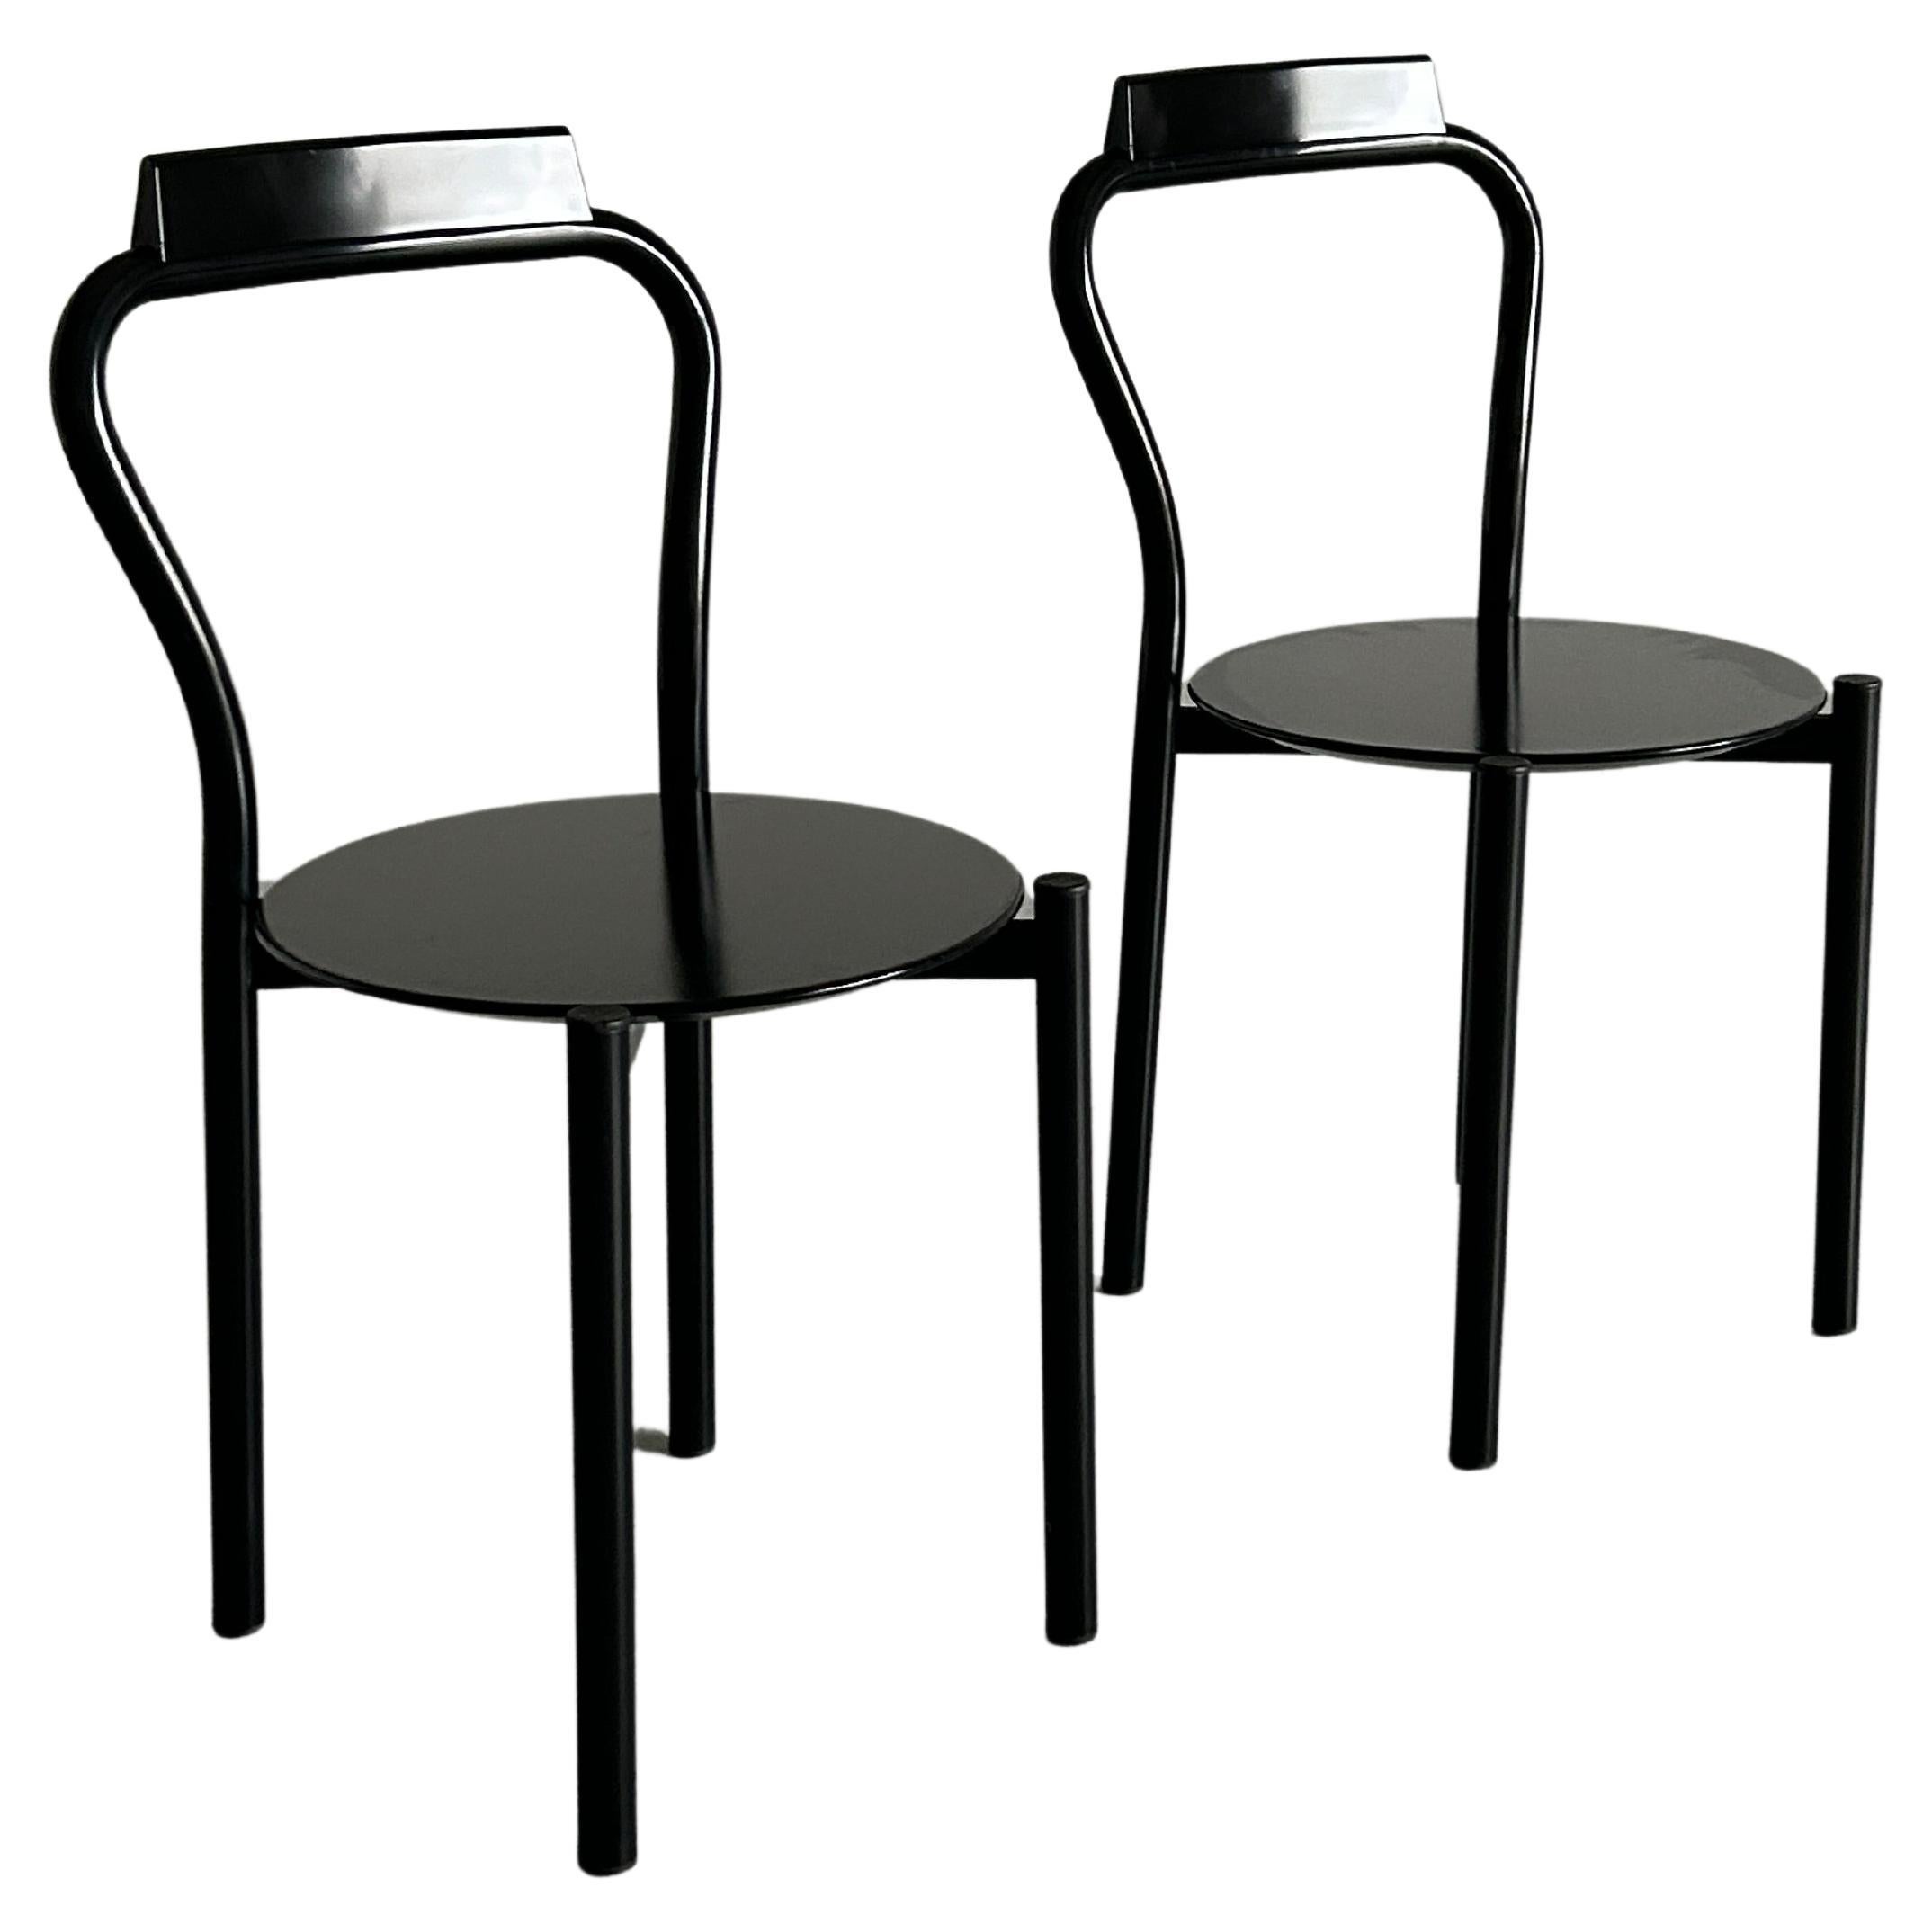 Pair of Italian Postmodern Memphis Style Curved Metal Chairs by Calligaris, 90s